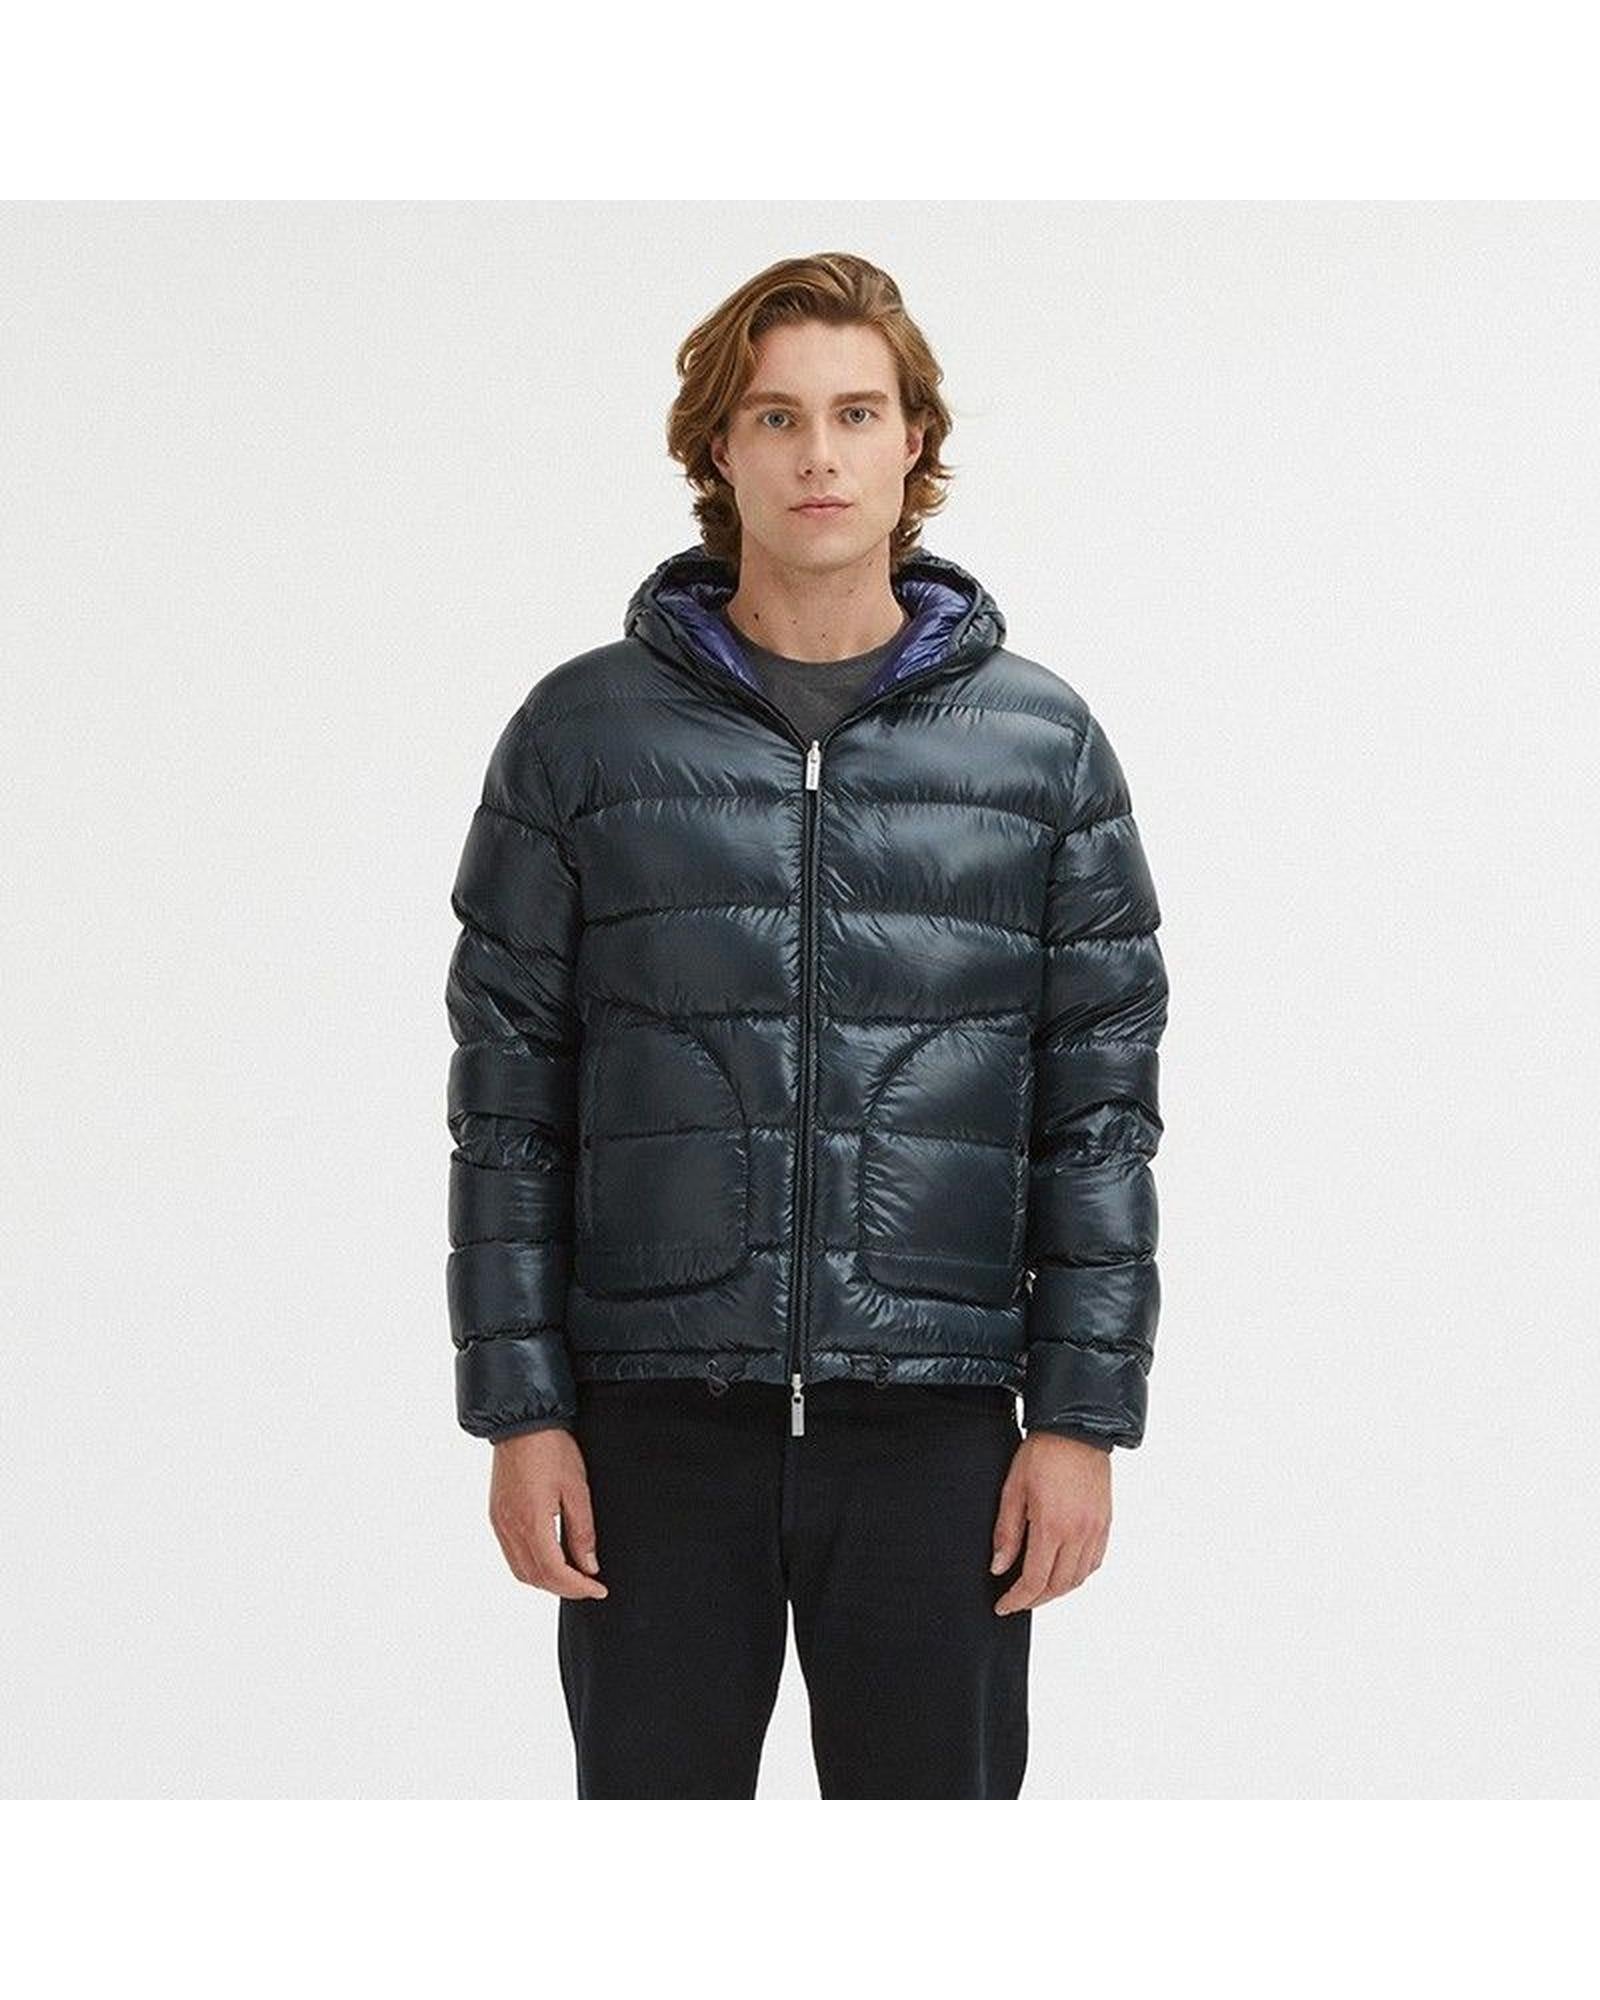 Reversible Hooded Jacket with Zip Closure and Duck Feather Padding M Men